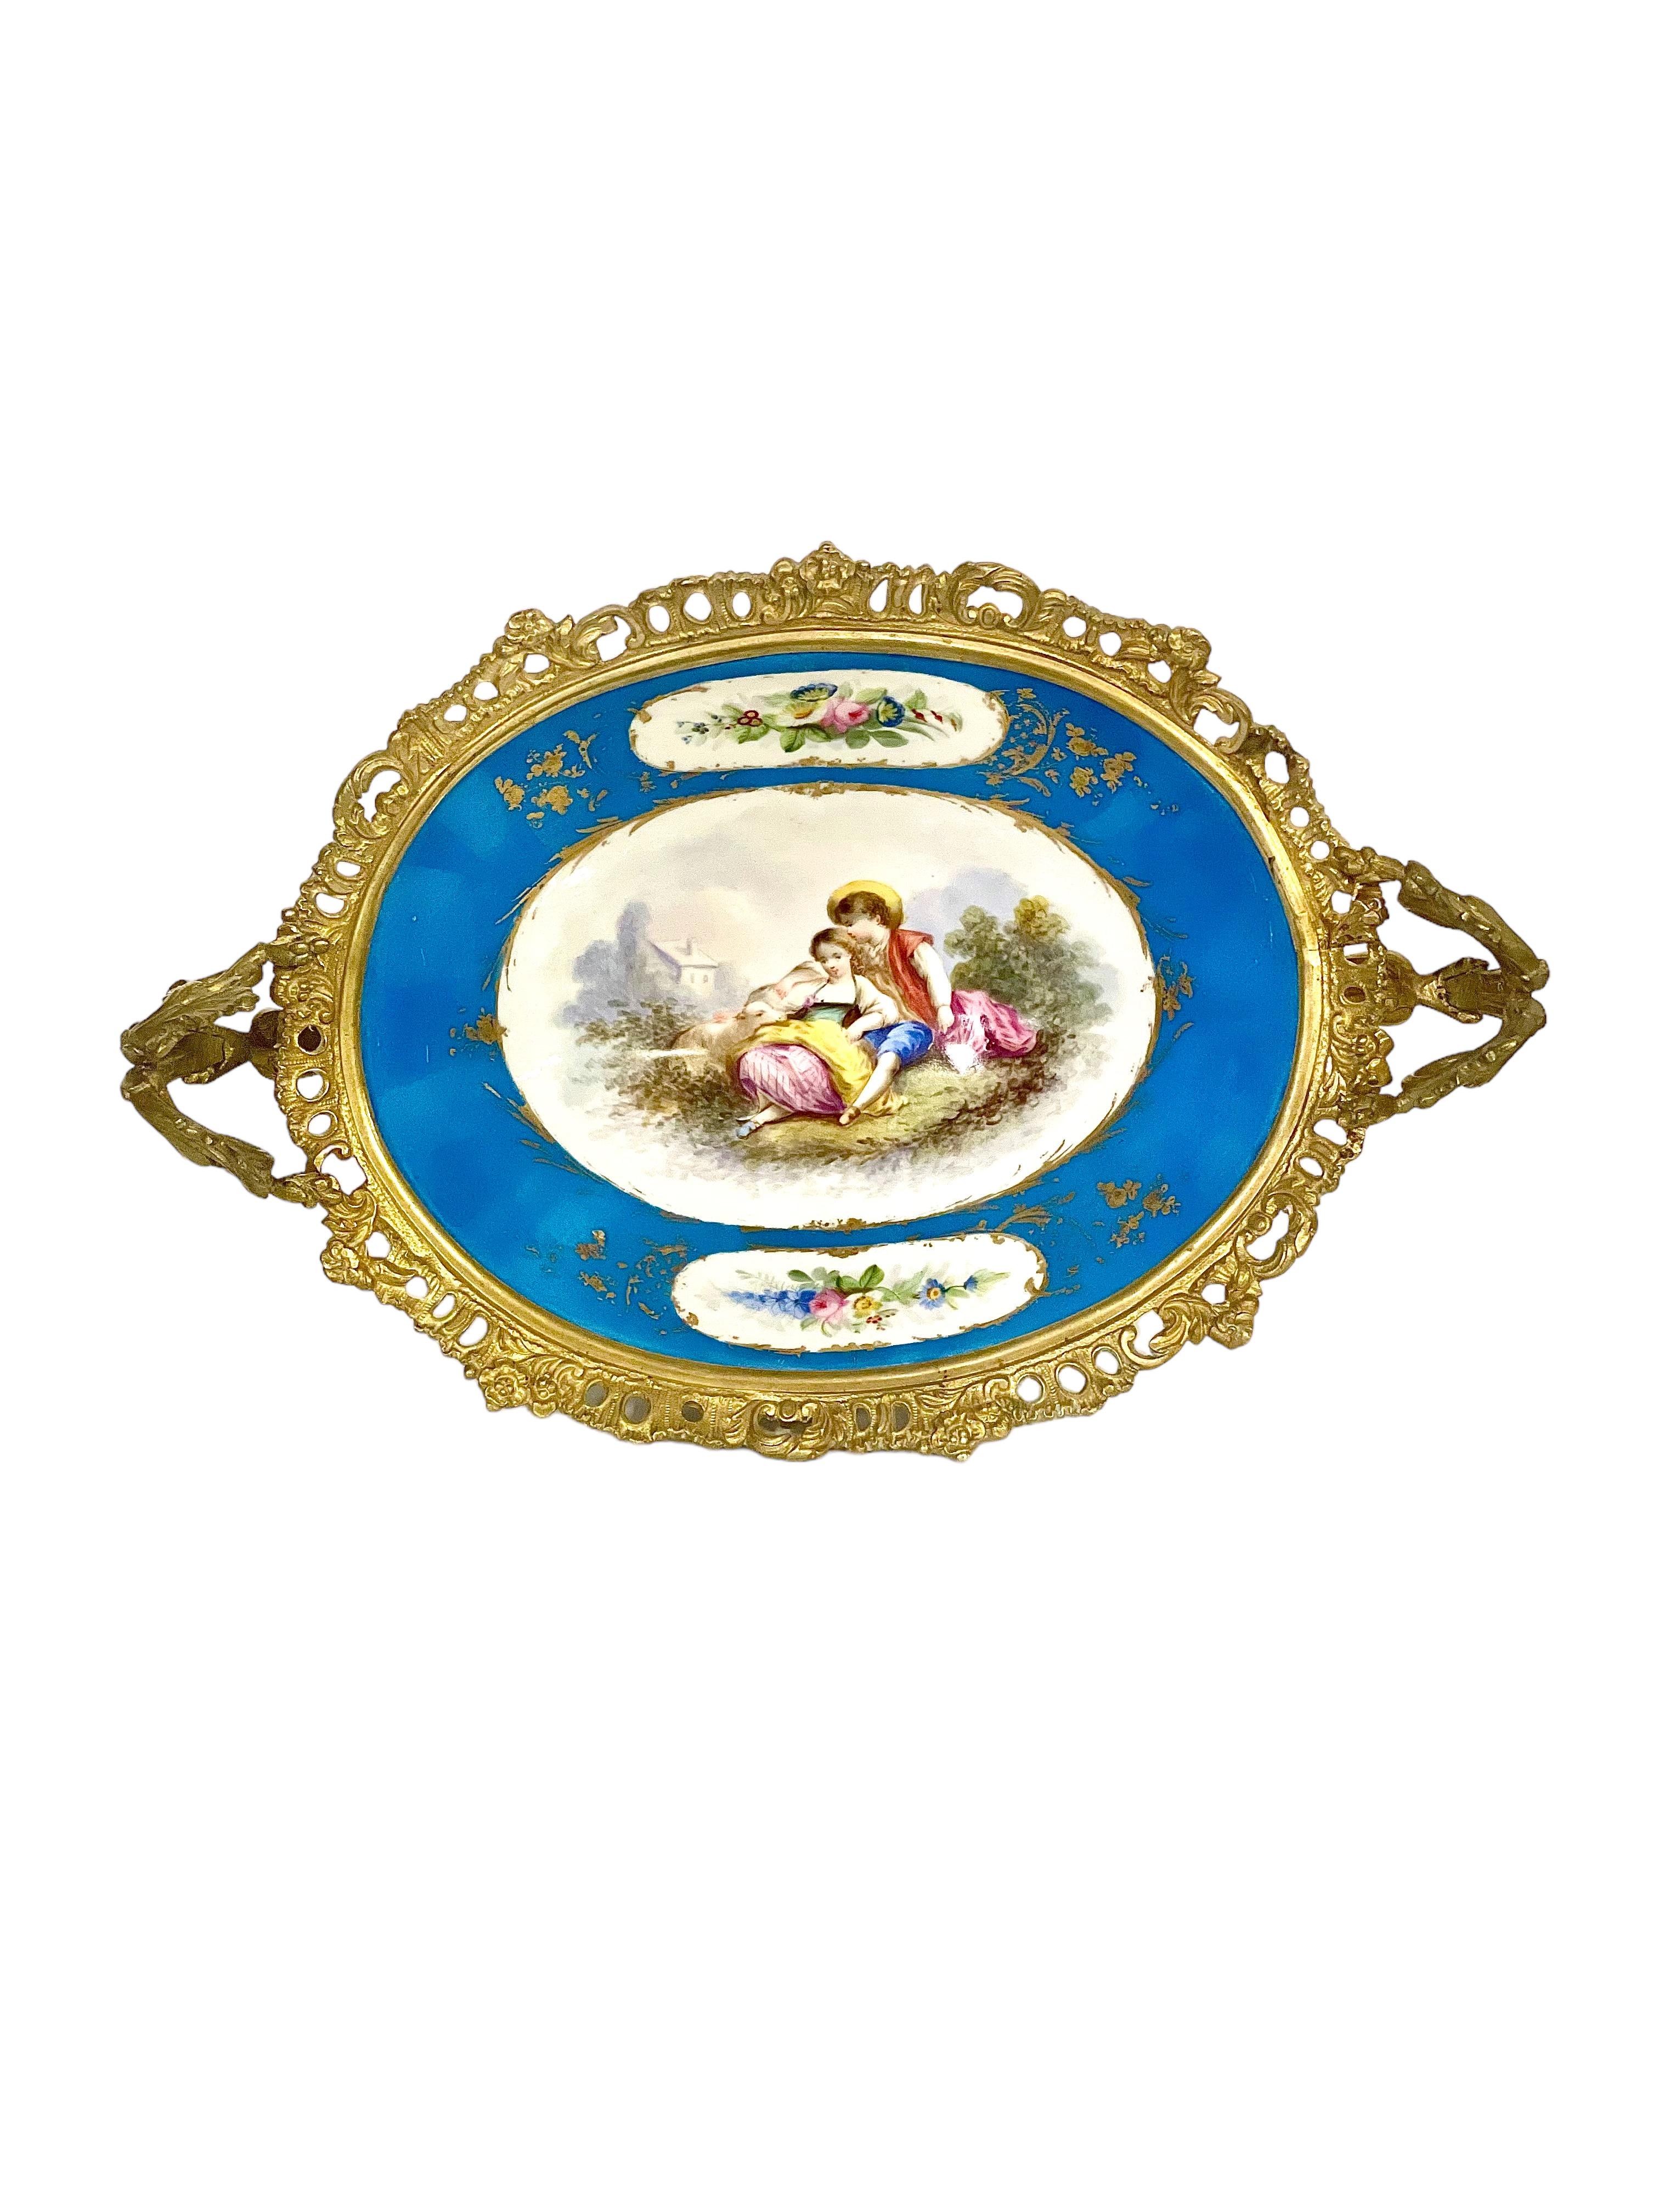 An exquisite 19th century Napoleon III compote, or centrepiece, in delicate Sèvres porcelain and gilt bronze. Designed to grab all the attention as the decorative focal point on a dining table, the interior of this fabulous dish has been